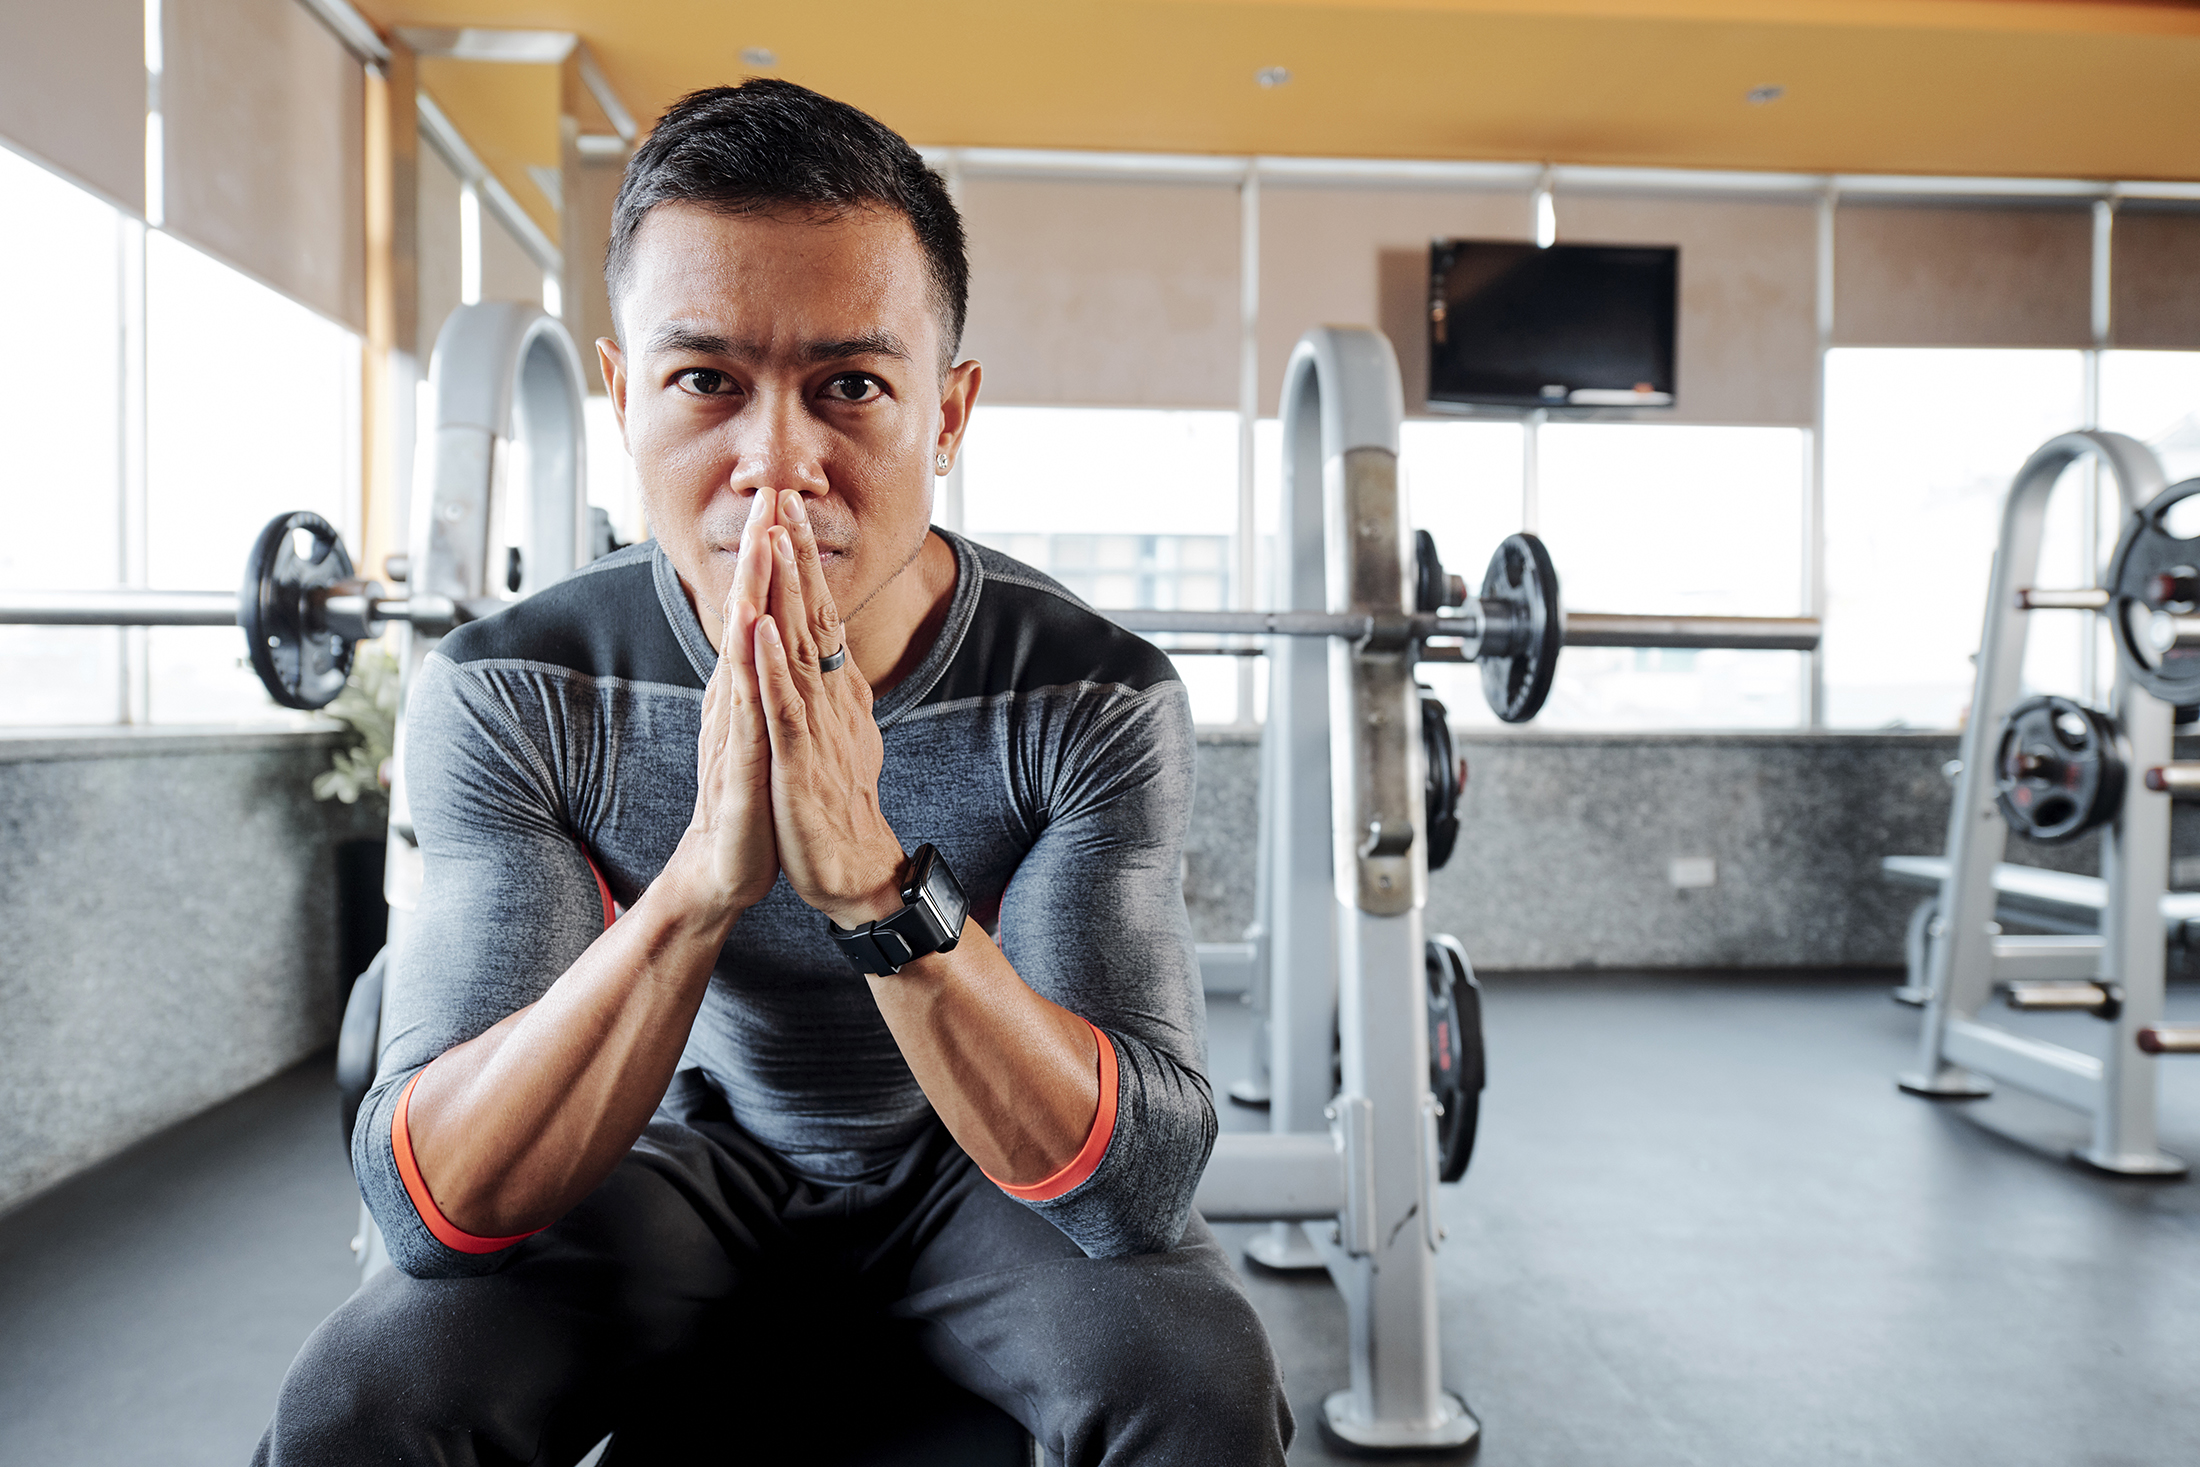 Serious gym owner with pain in his eyes praying for ending of the pandemic and opening gyms and sports clubs